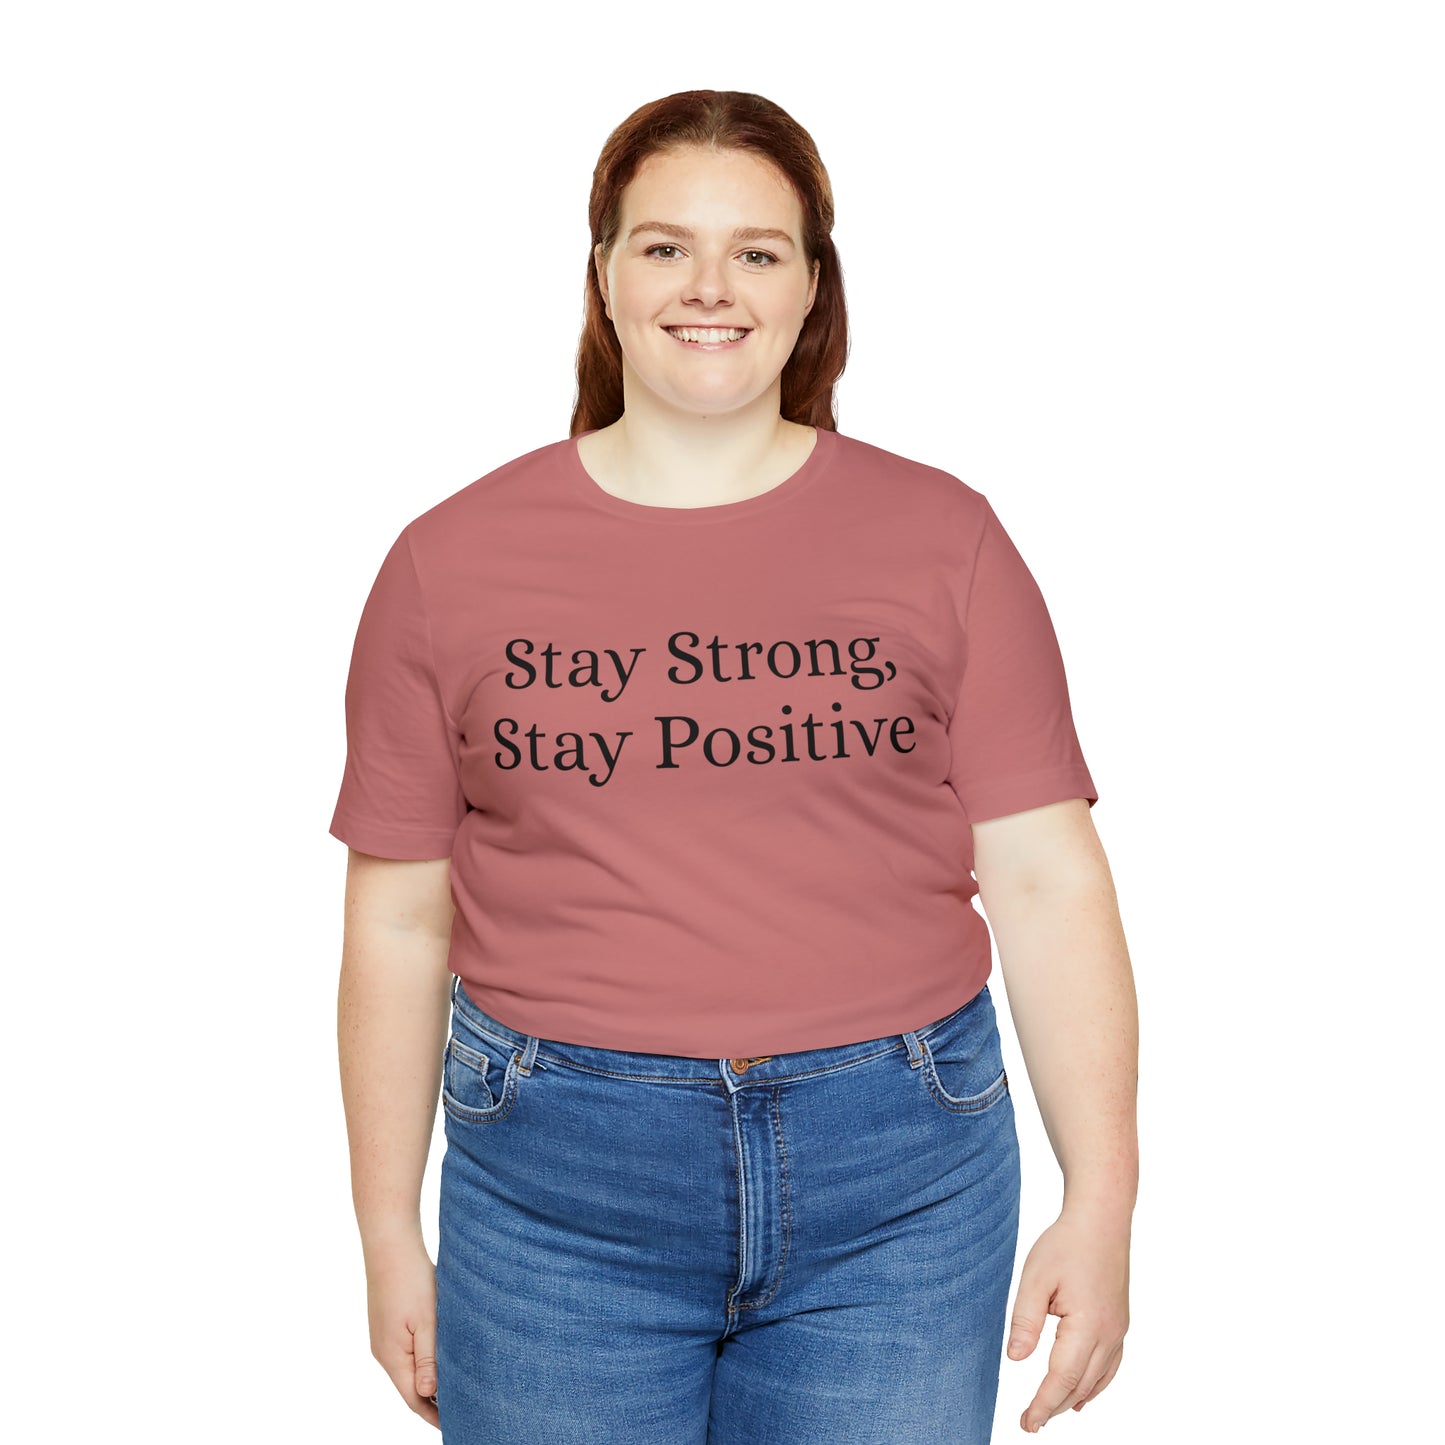 Stay Strong, Stay Positive